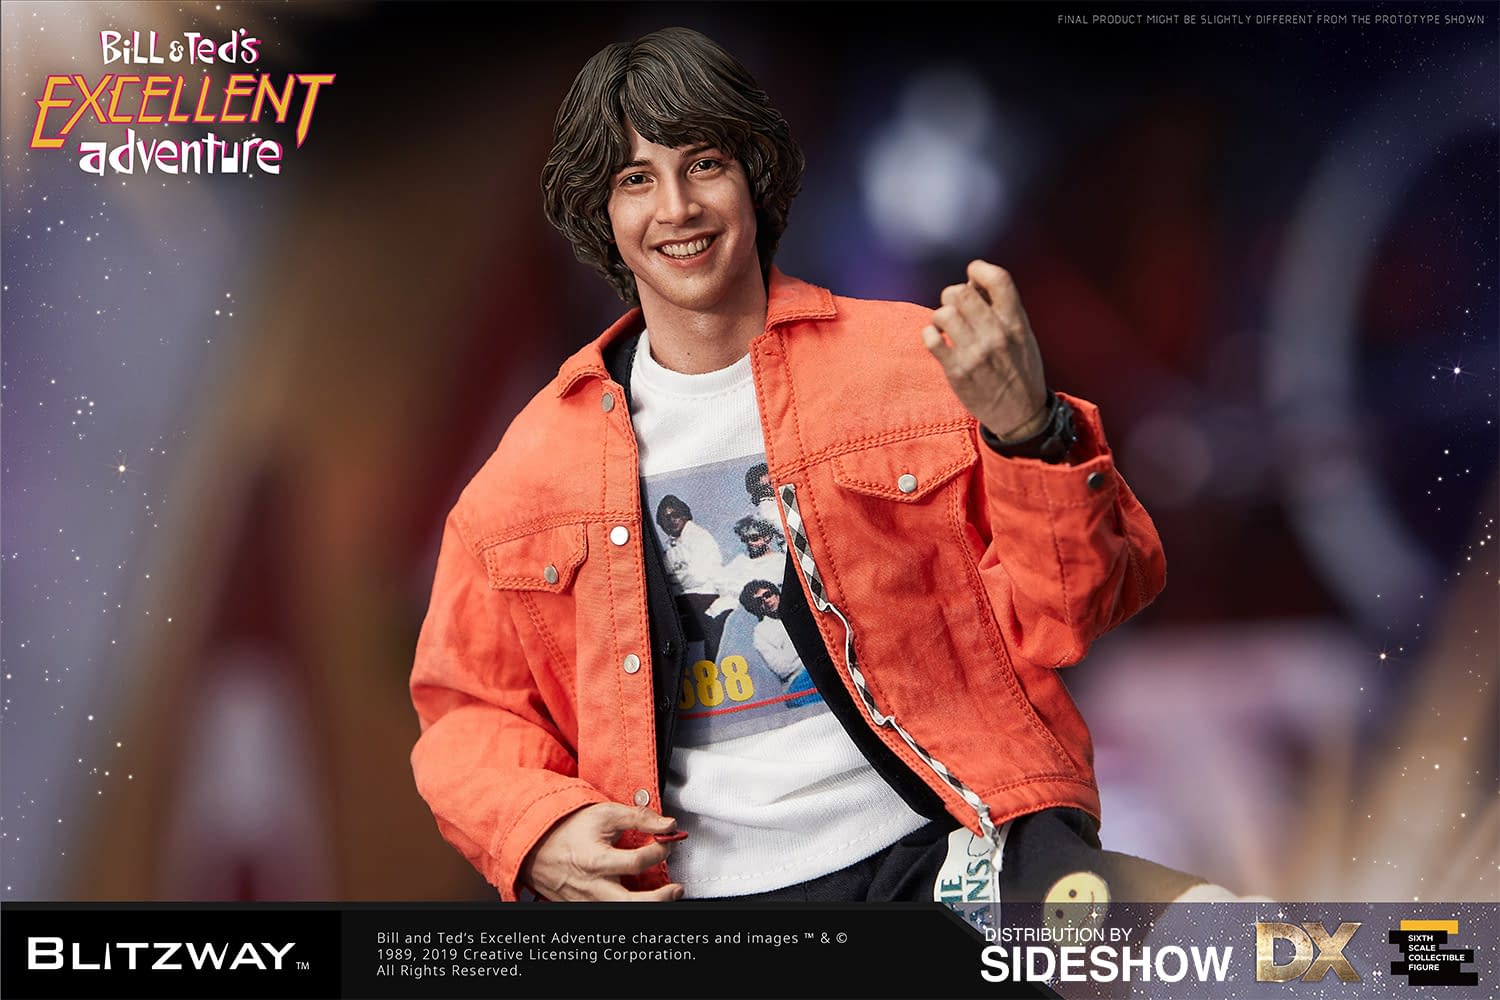 Return to the past with New Bill and Ted Figures